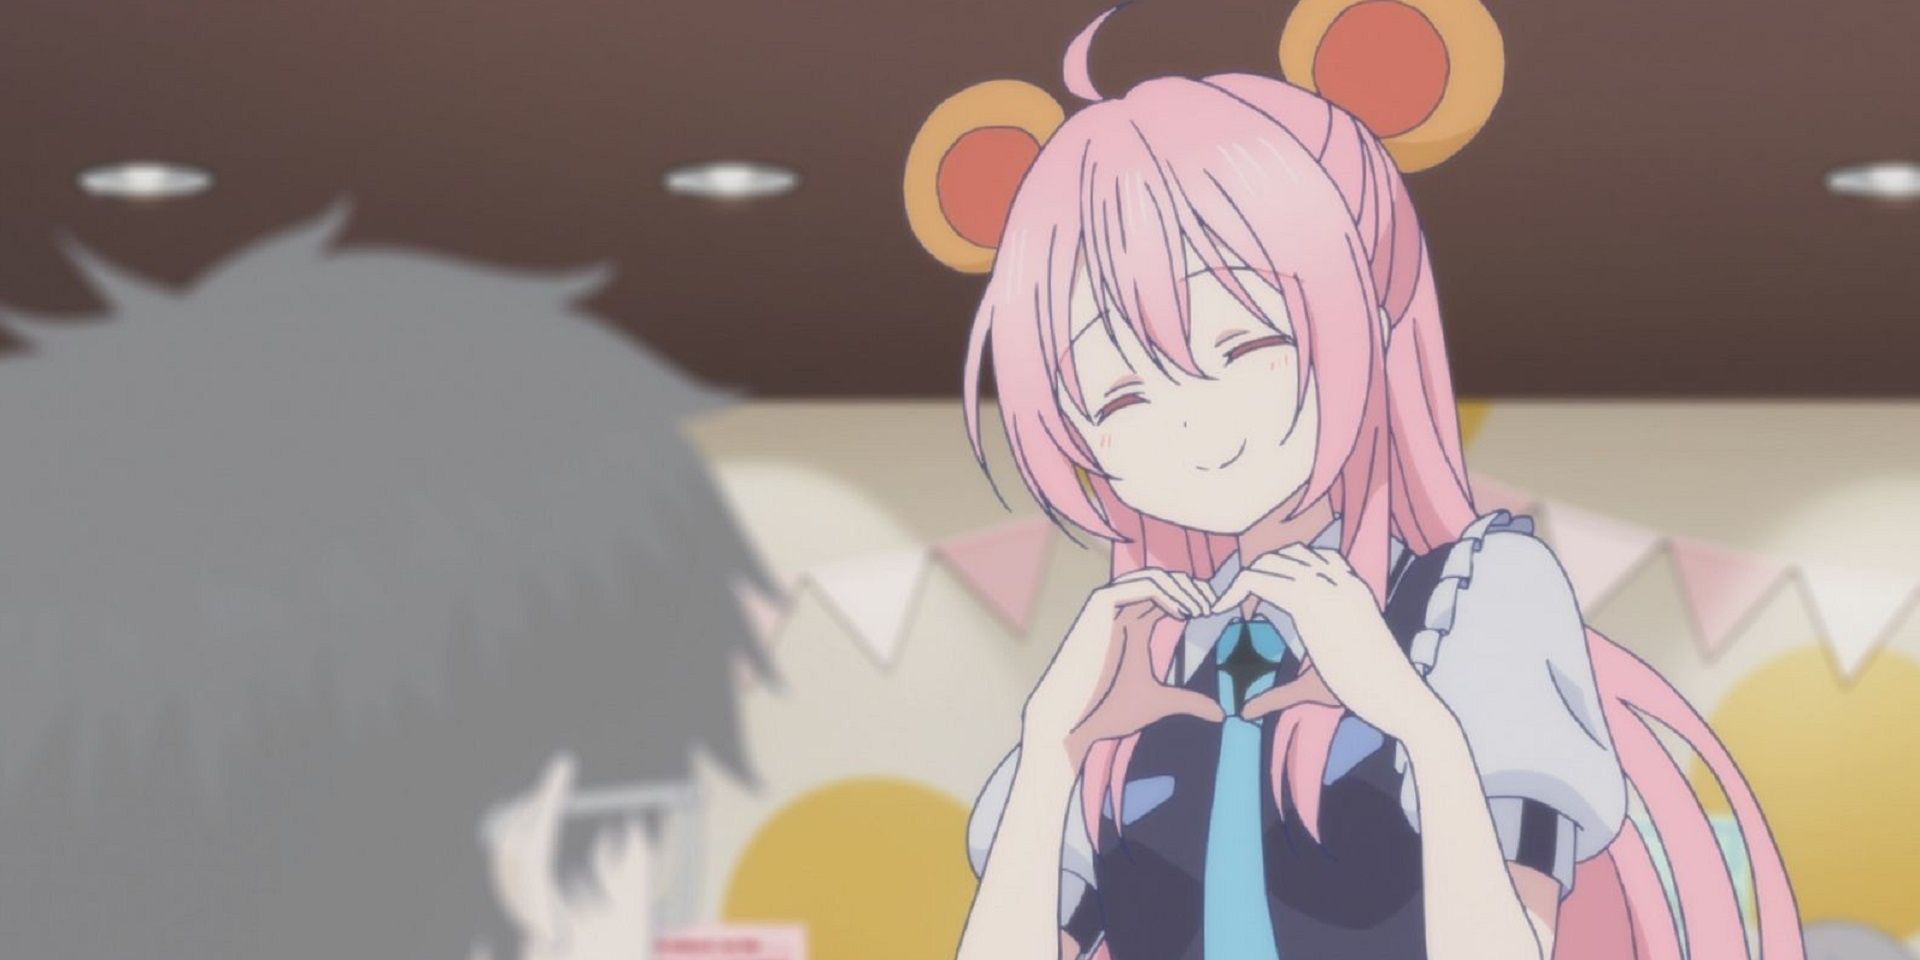 happy sugar life Satou making a heart shape with her hands and smiling